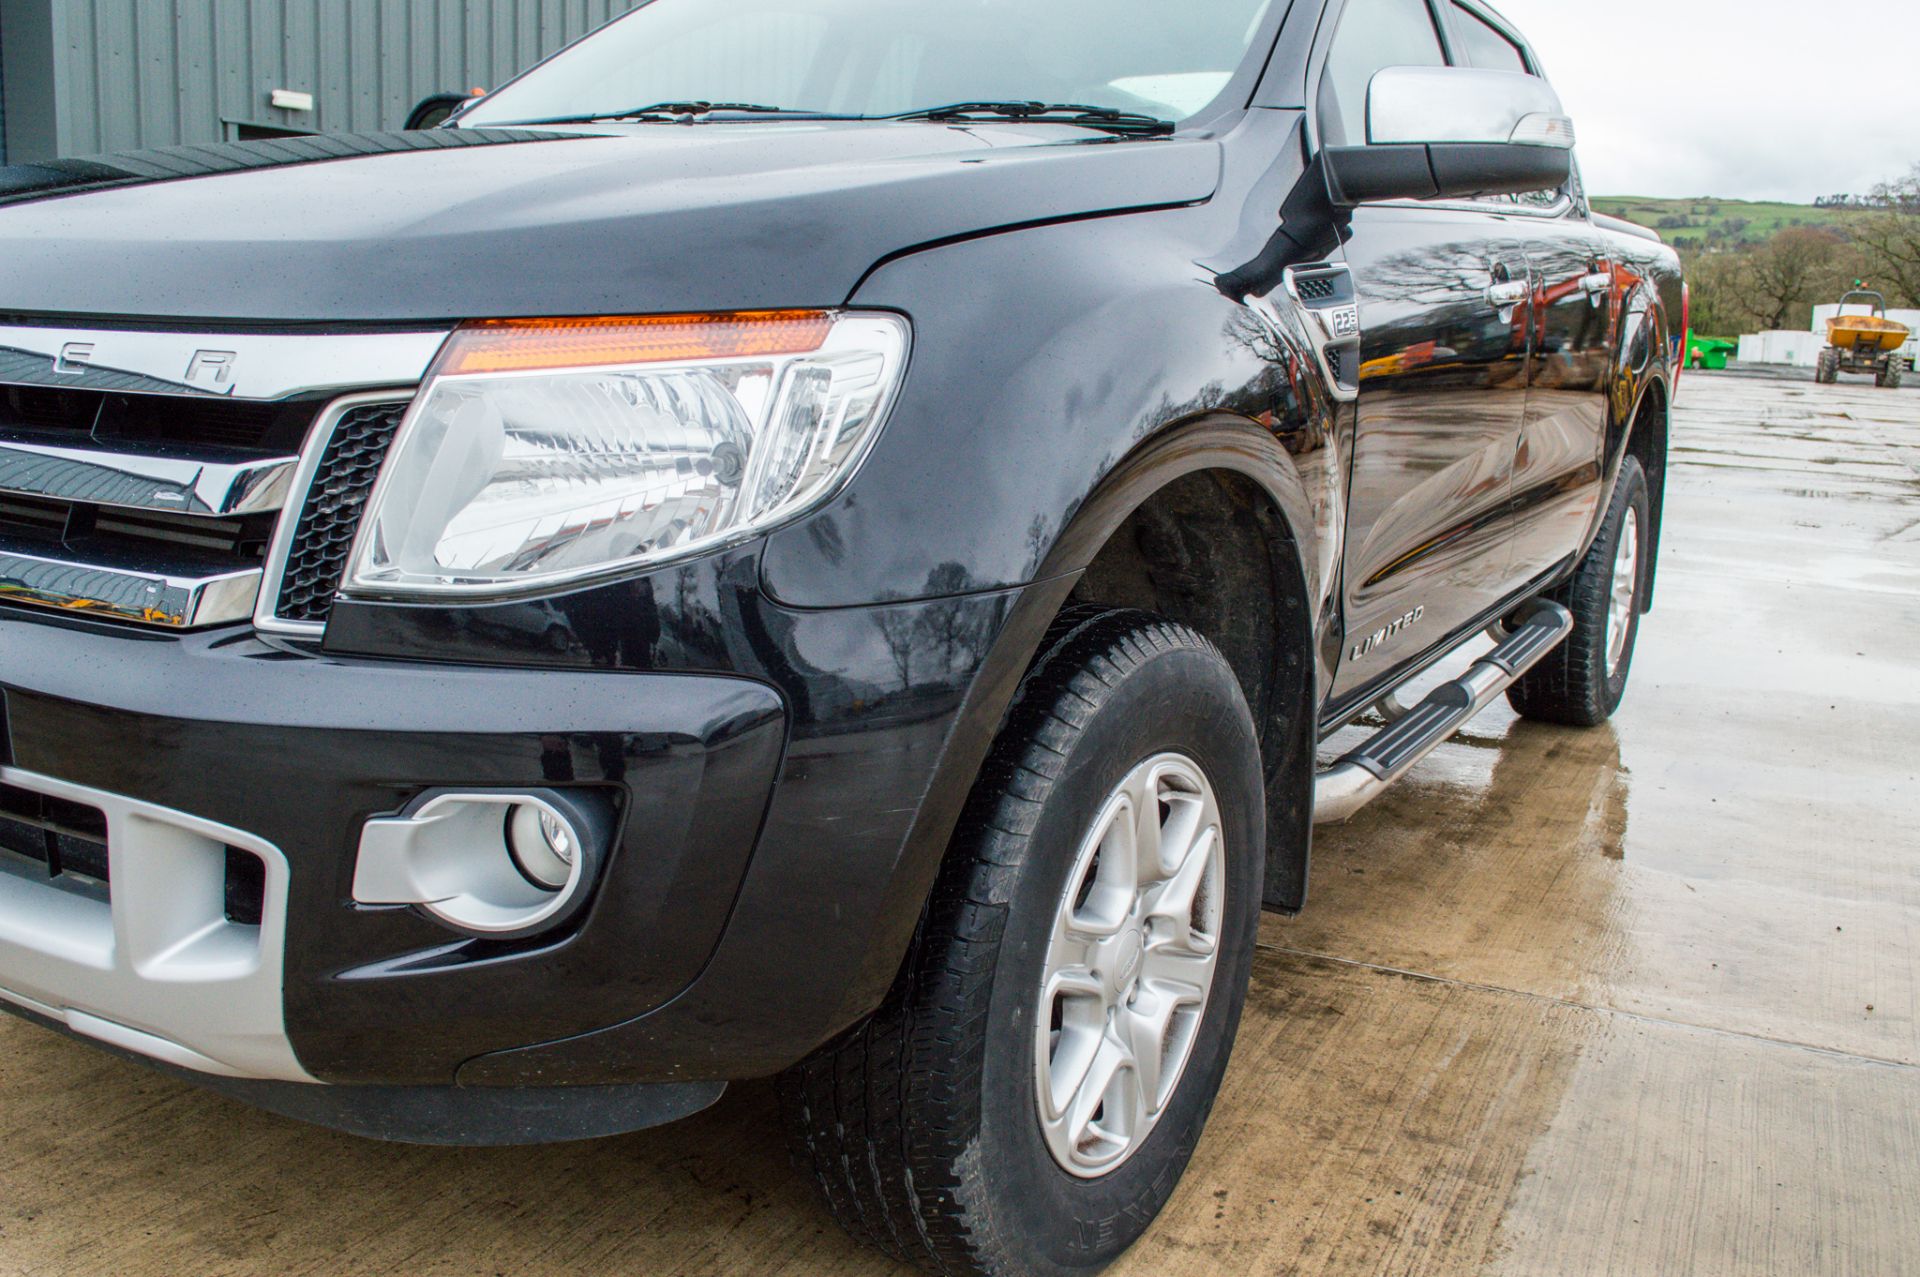 Ford Ranger 2.2 TDCI 150 Limited 4wd automatic double cab pick up - Image 6 of 28